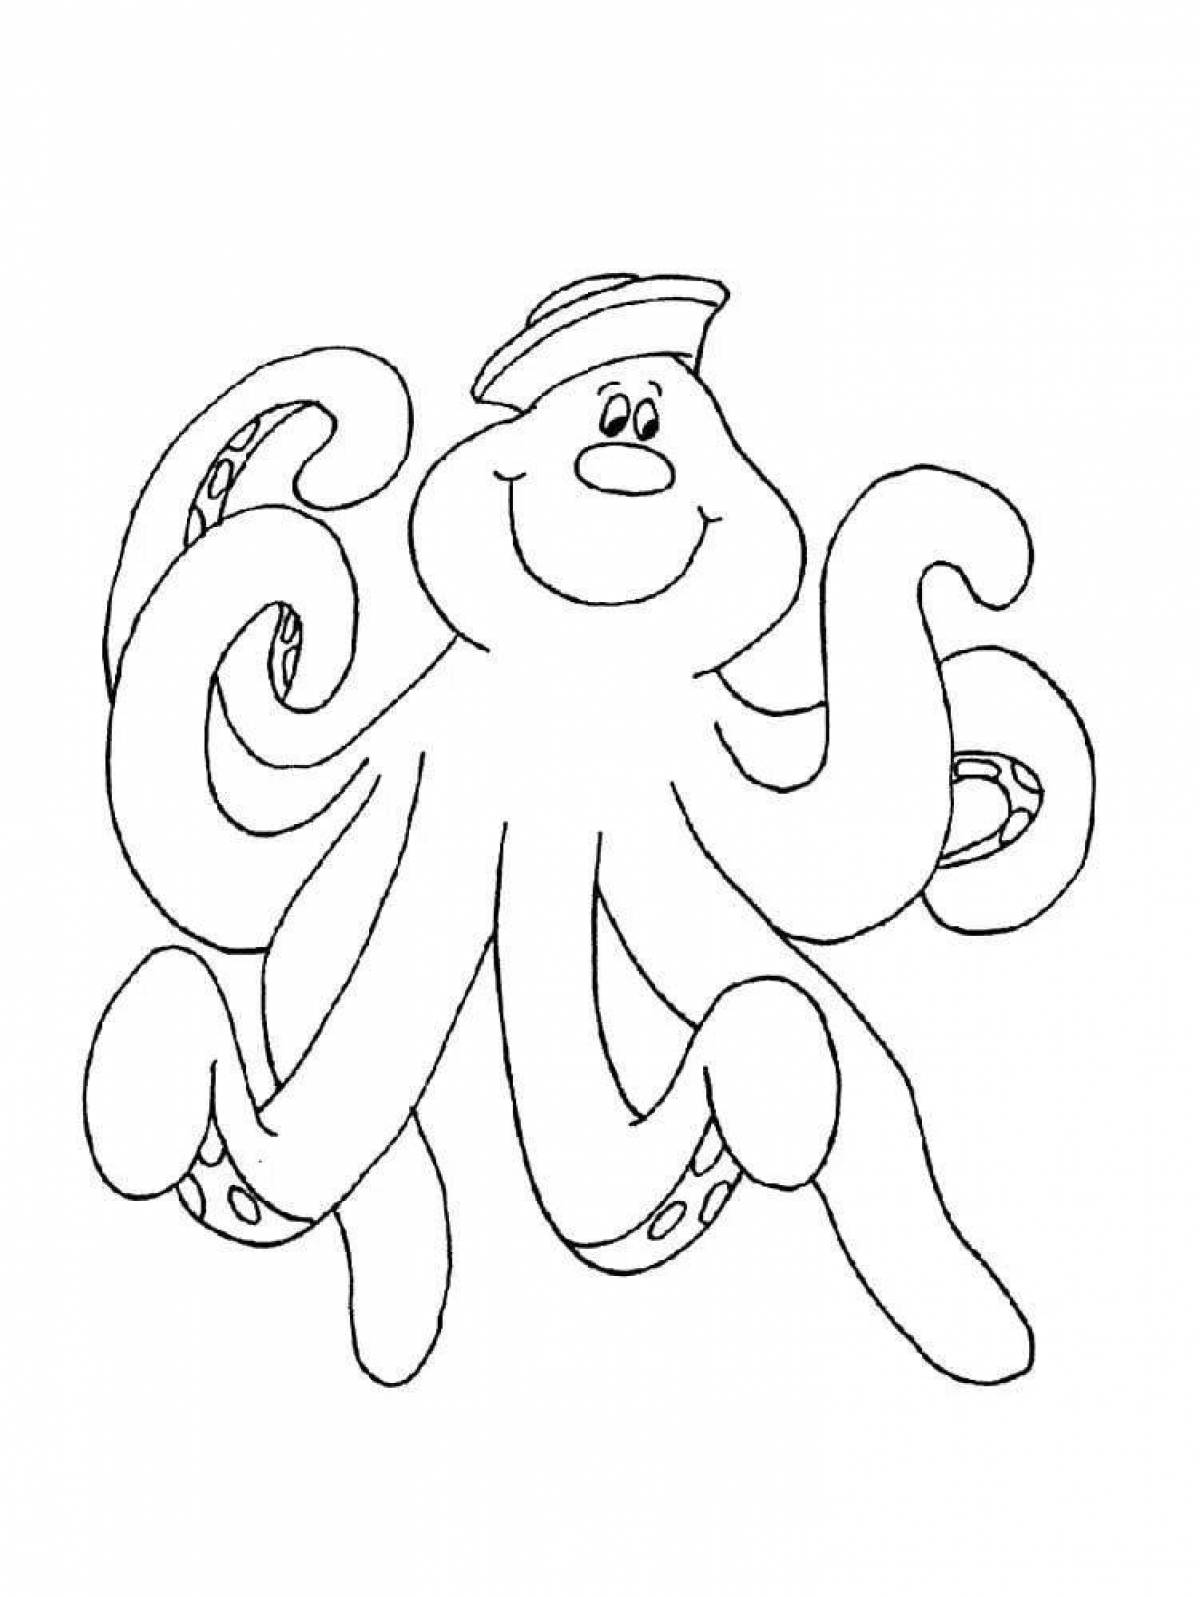 Magic octopus coloring page